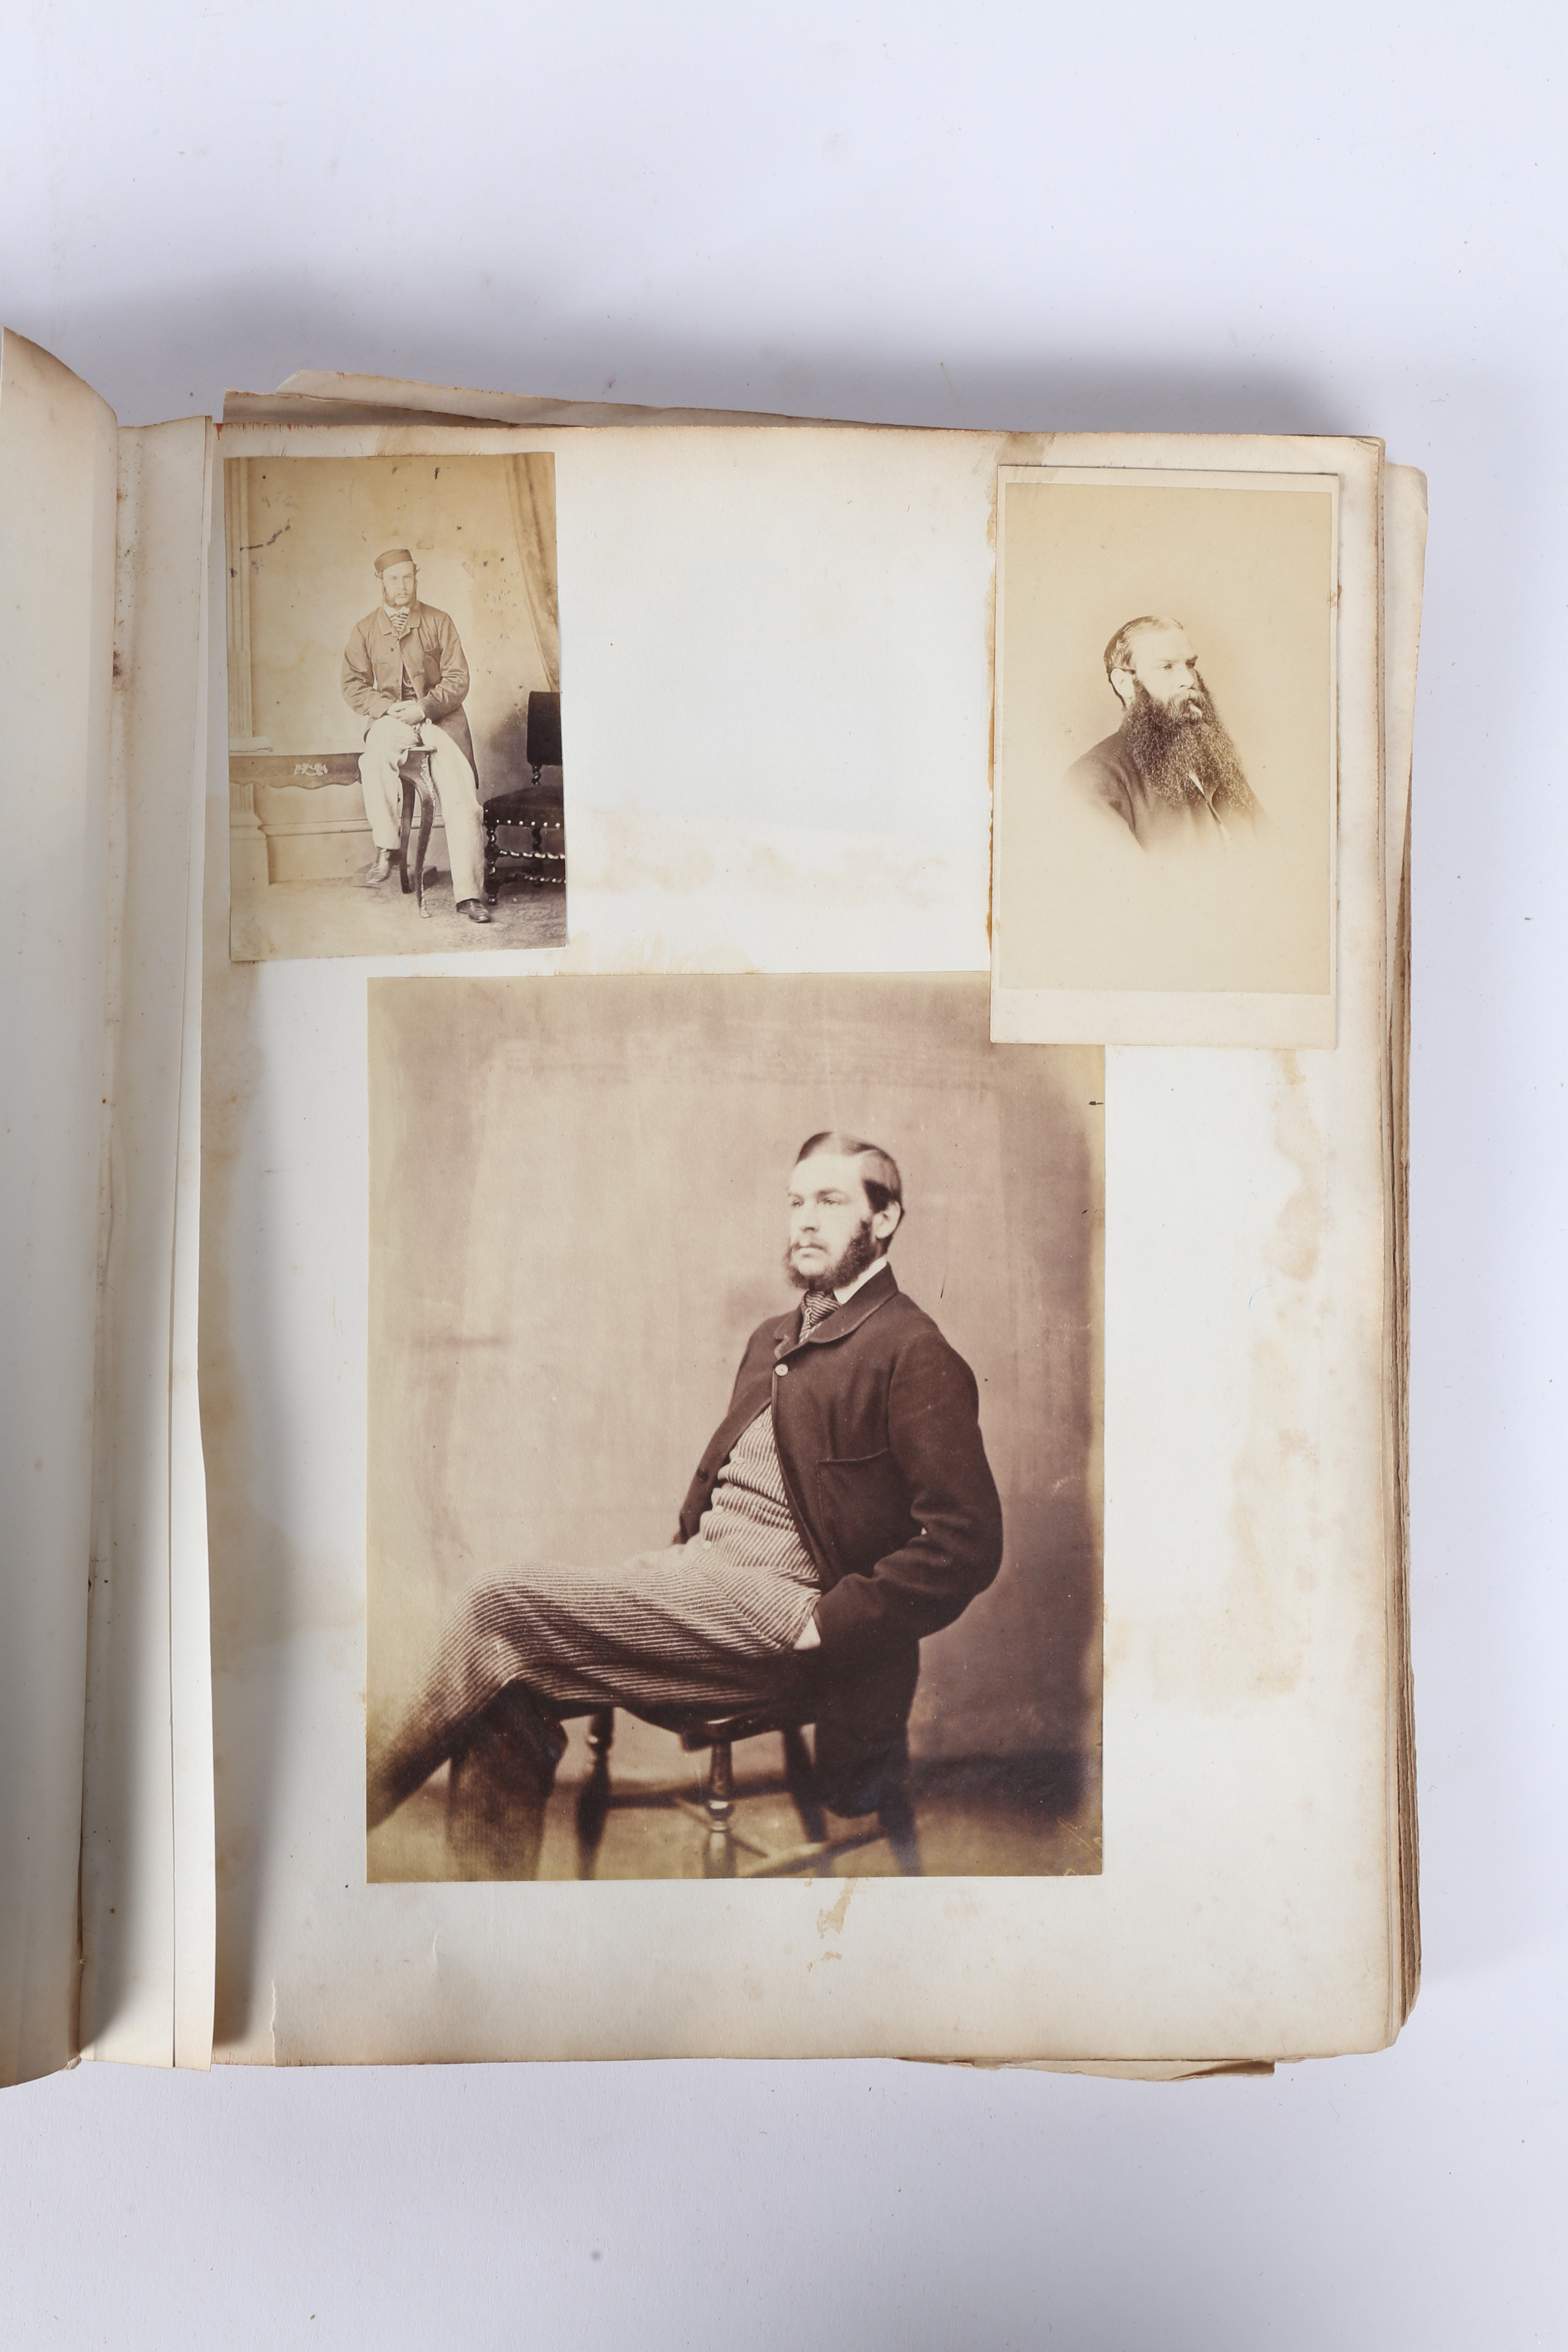 VICTORIAN PHOTOGRAPH ALBUM BELONGING TO GENERAL SIR HARRY JONES GCB DCL, AND HIS WIFE LADY CHARLOTTE - Image 56 of 60